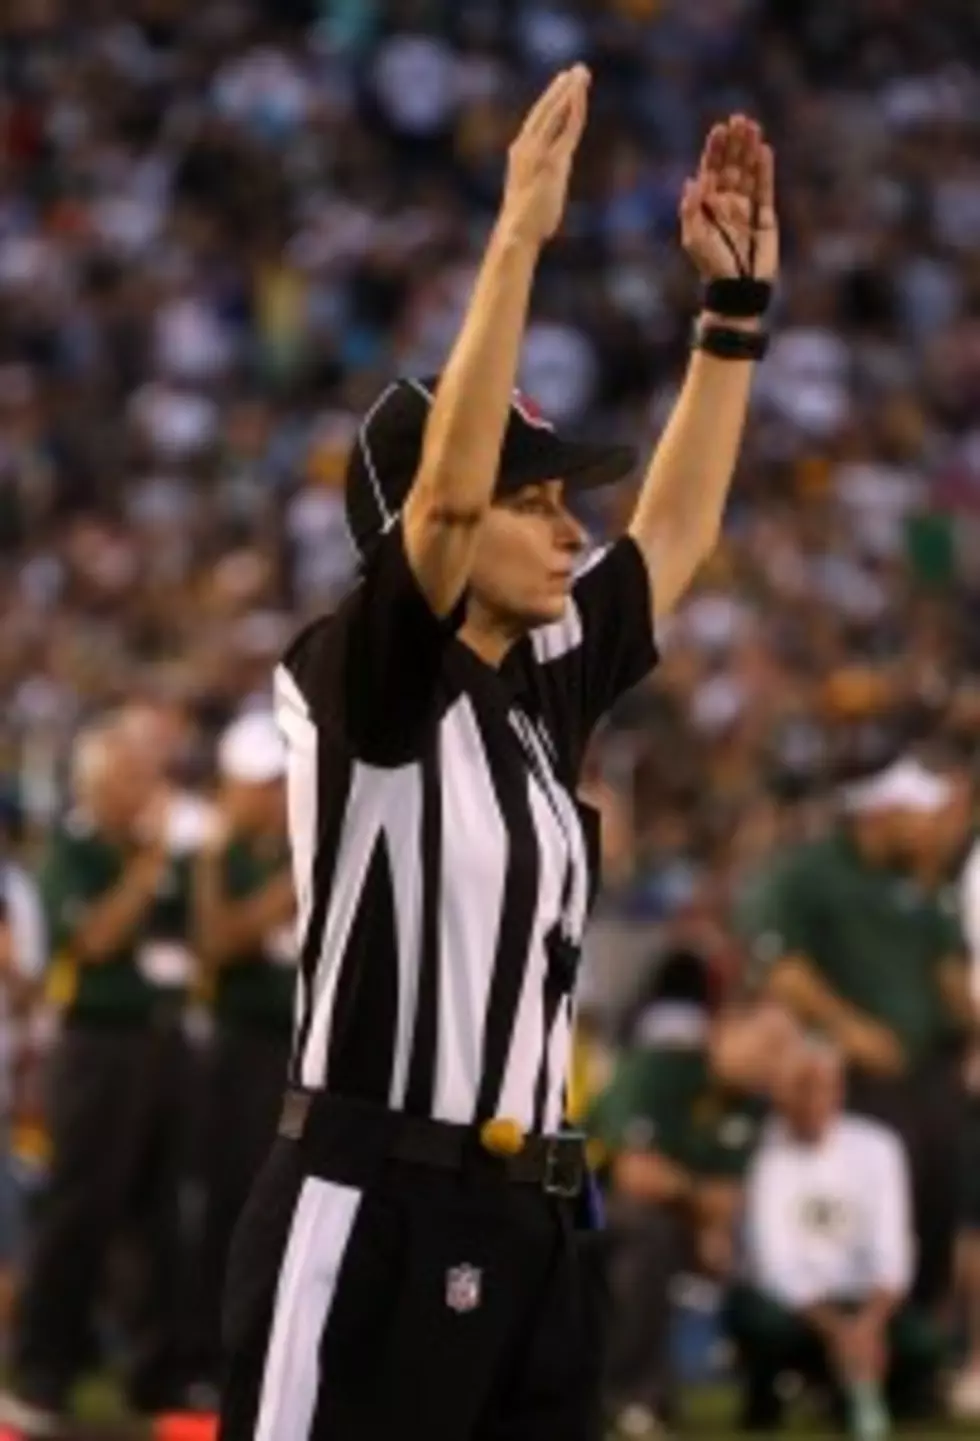 Women Referees in the NFL [VIDEO]